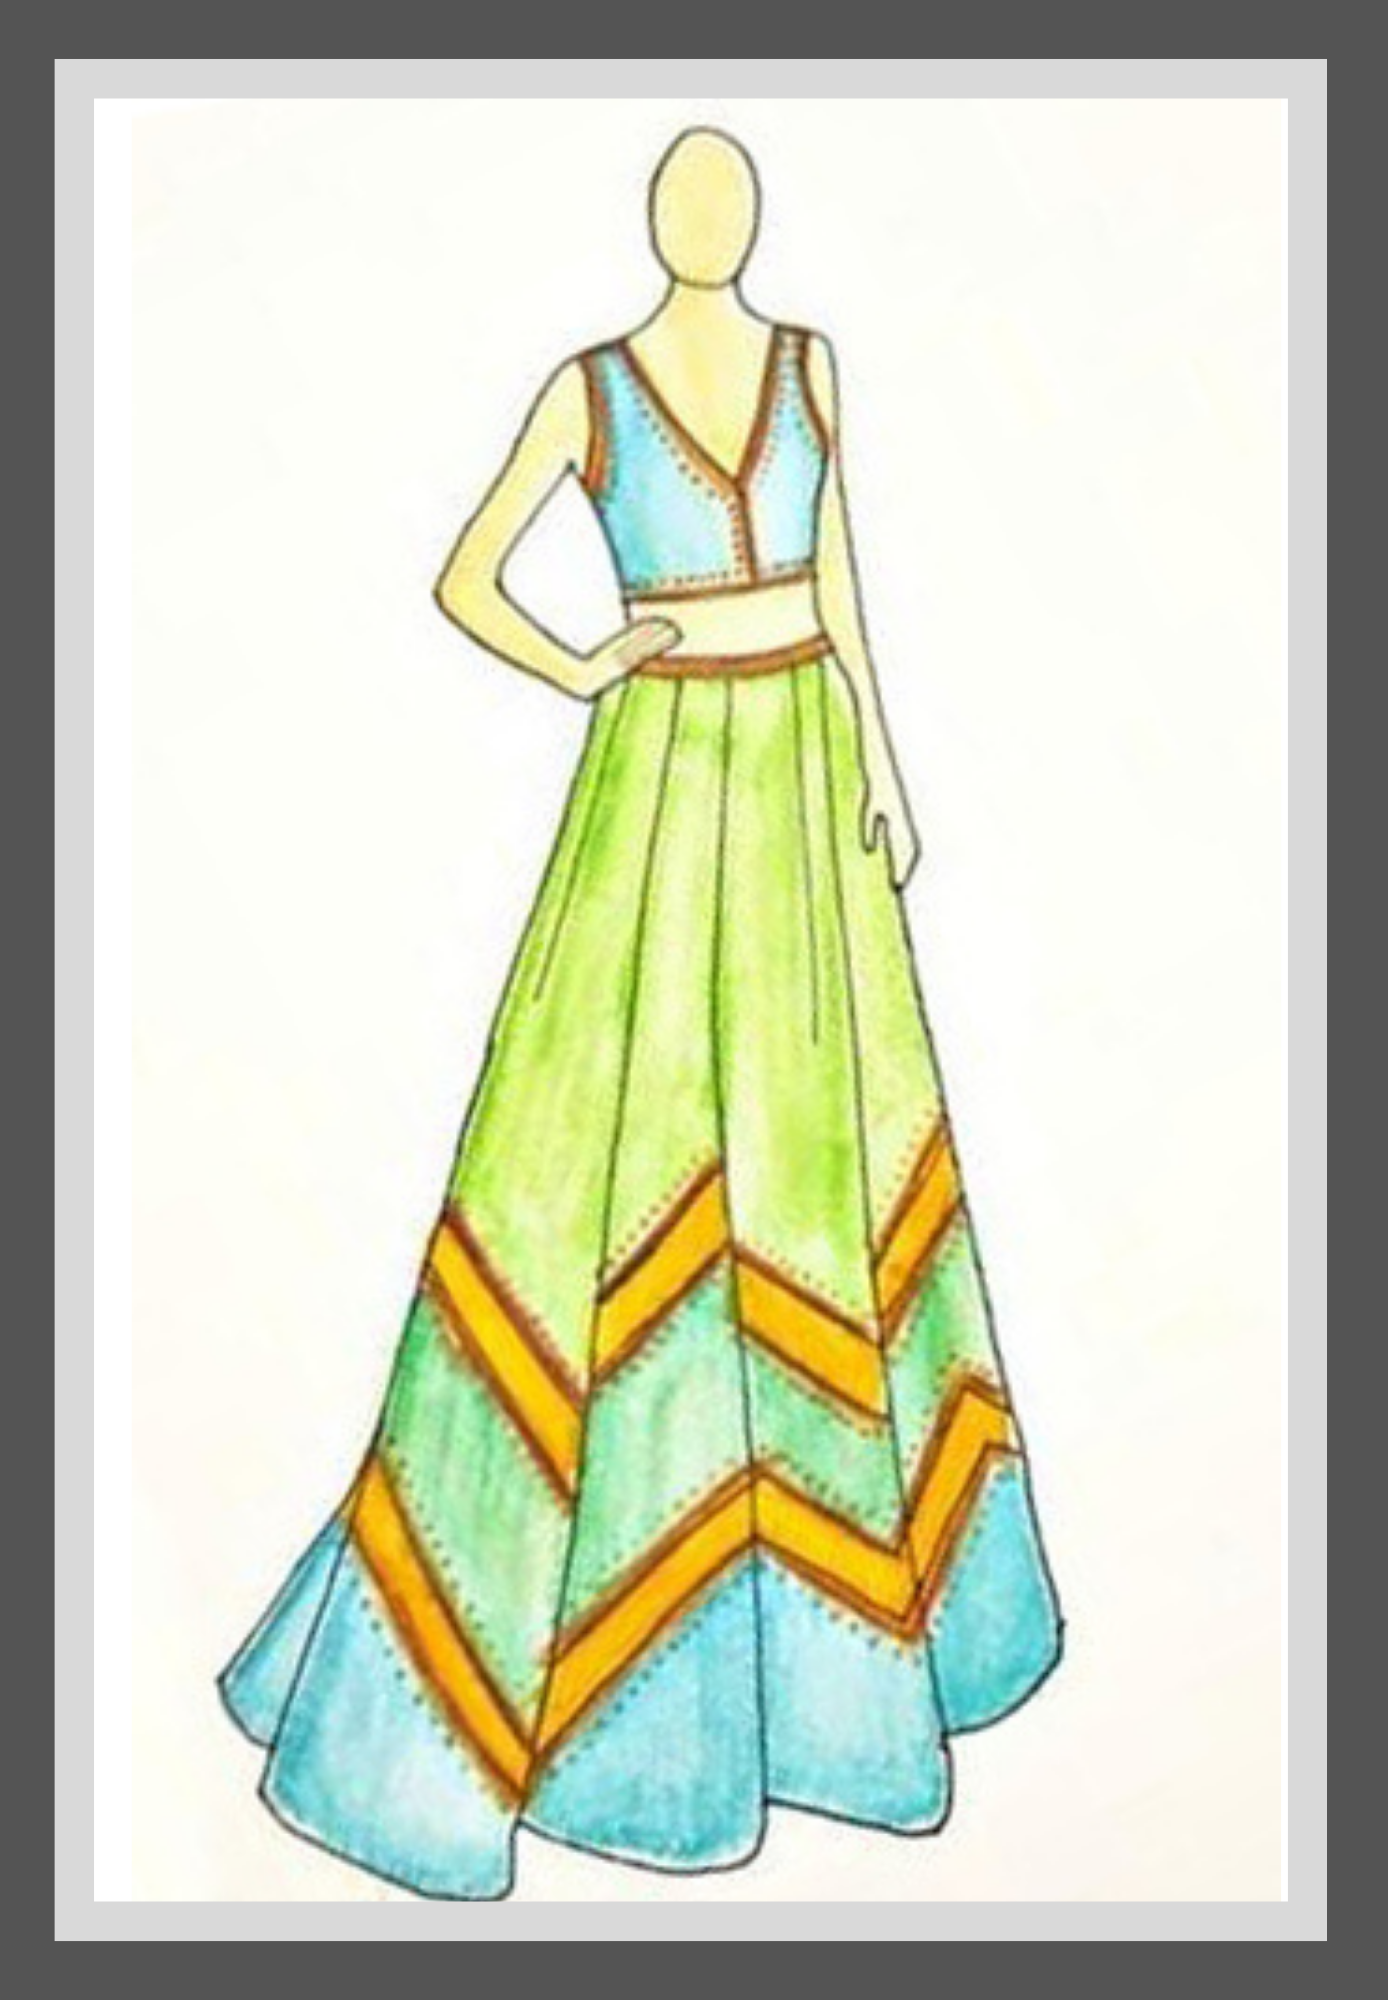 dress #design #sketches #for #beginners #dressdesignsketchesforbeginners | Dress  design sketches, Fashion sketches dresses, Fashion drawing dresses